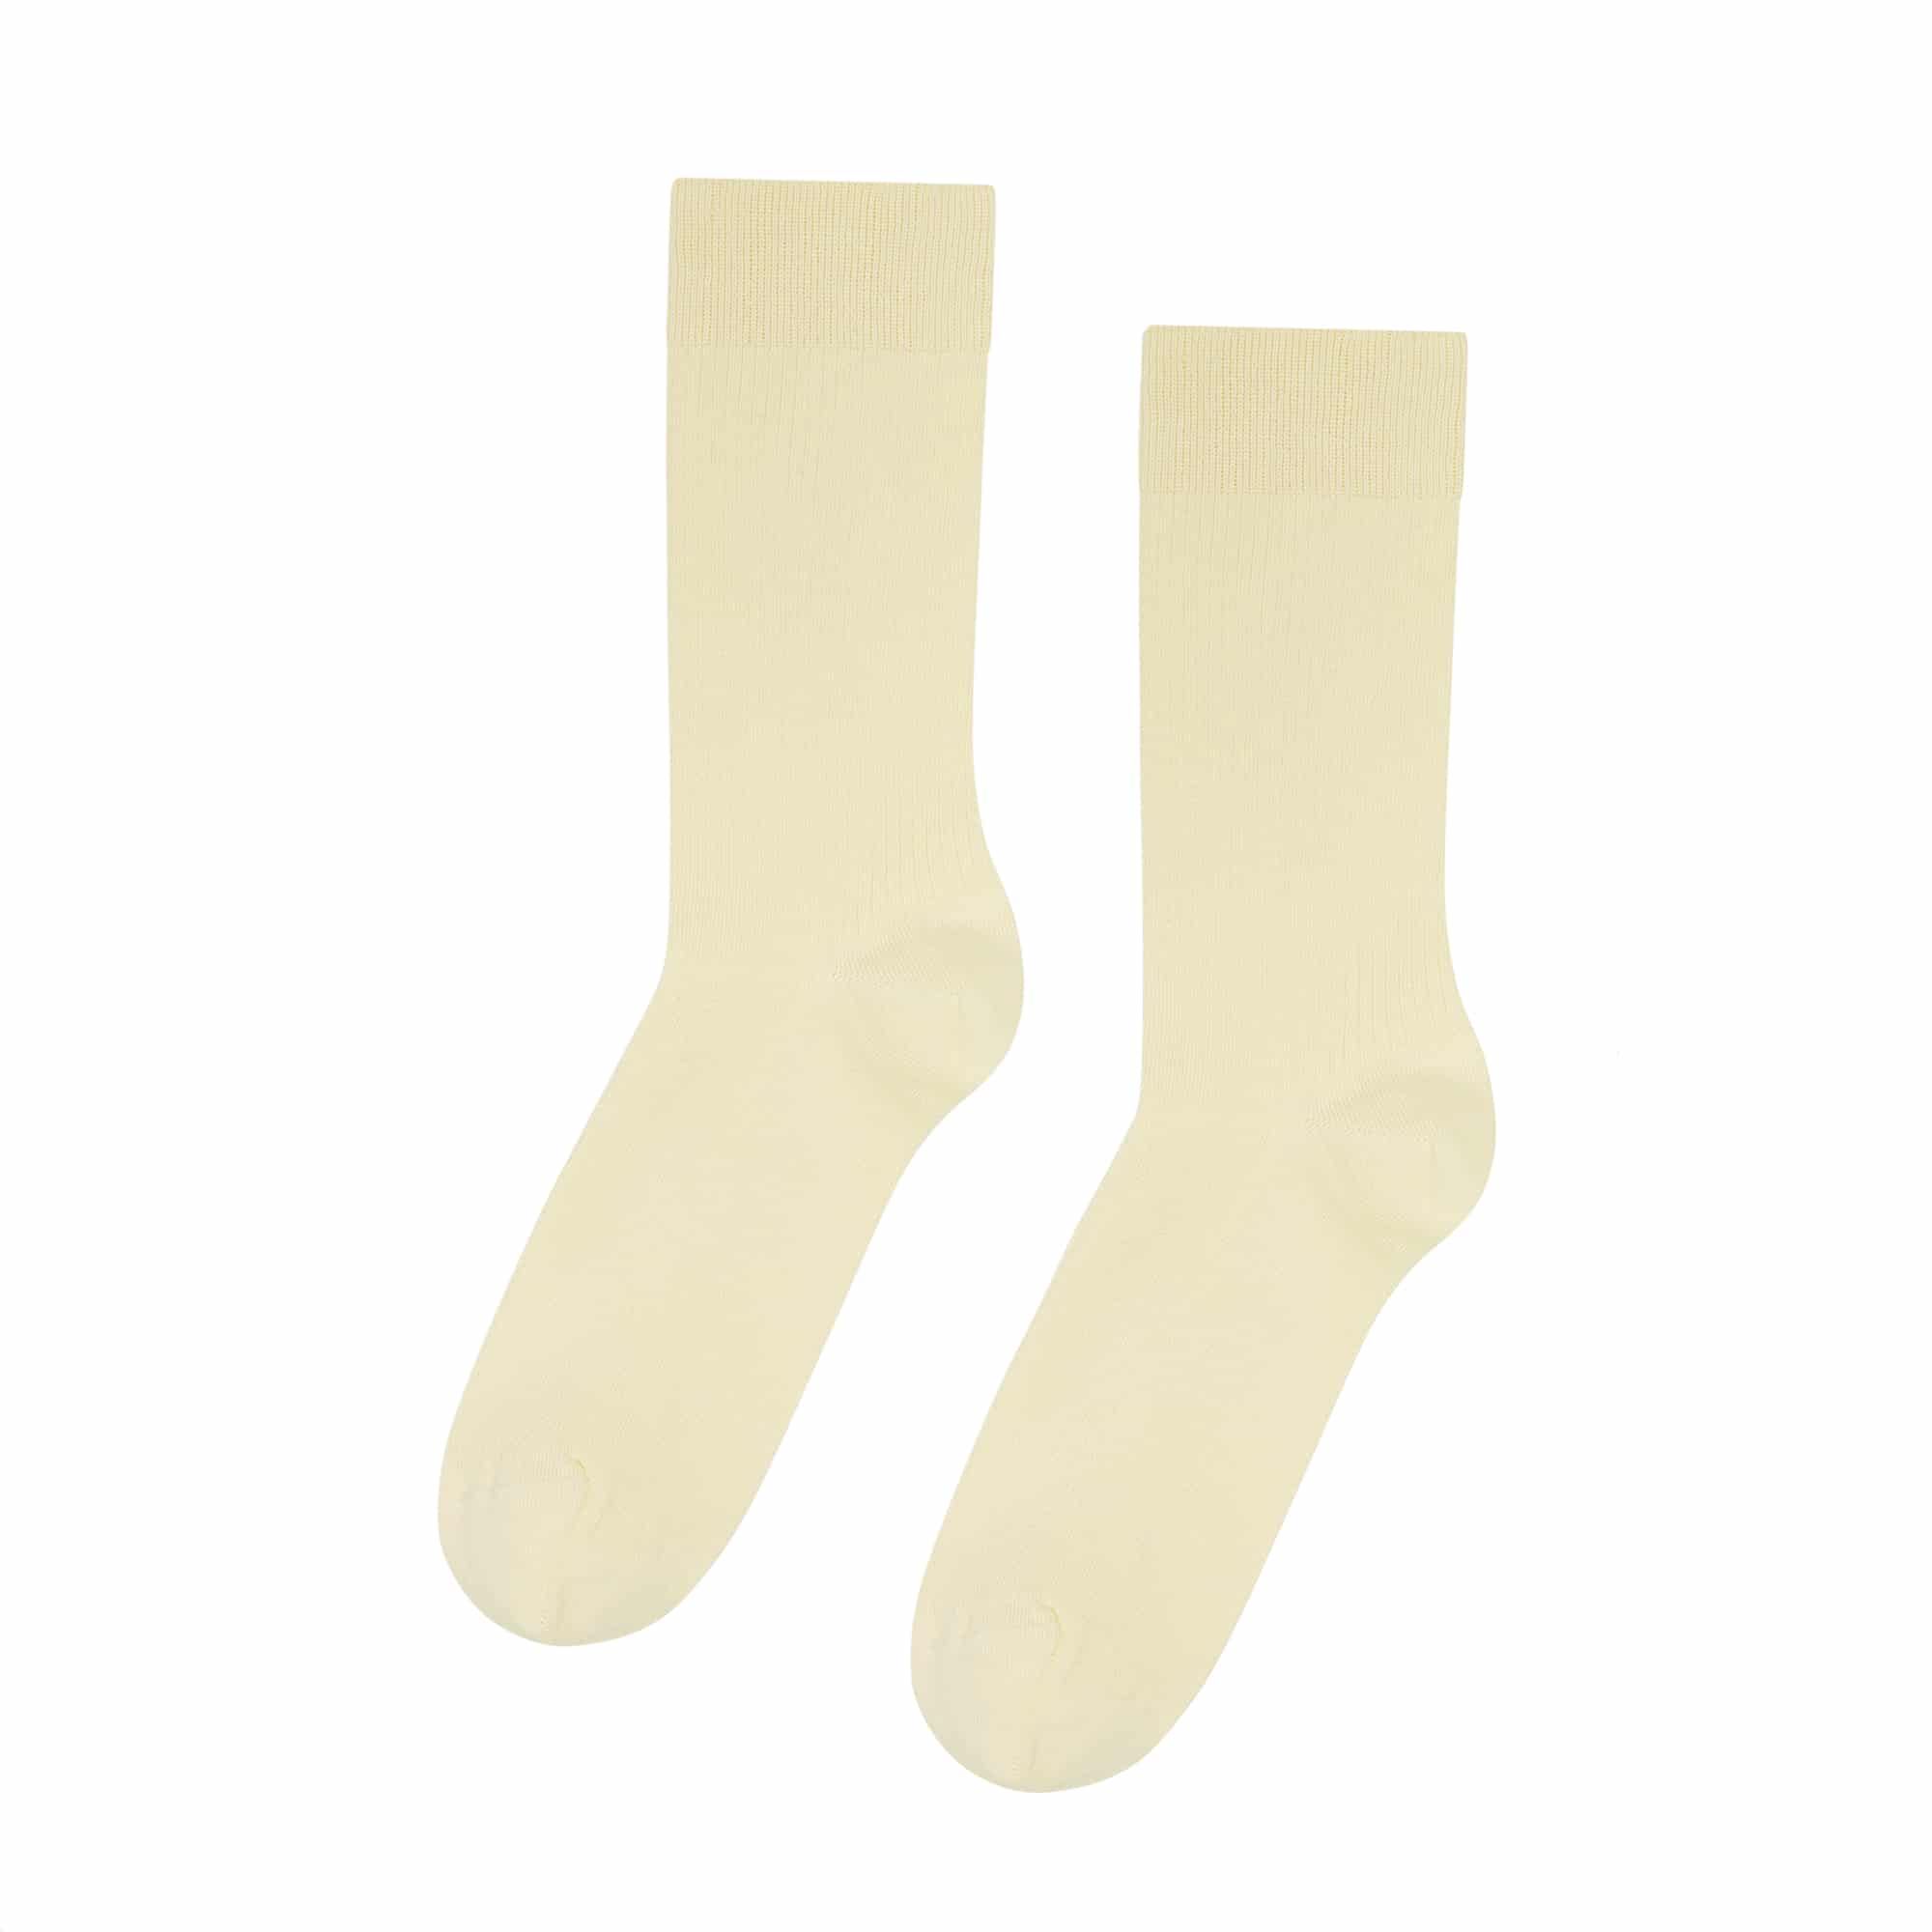 Soft Yellow – One Size 7-11